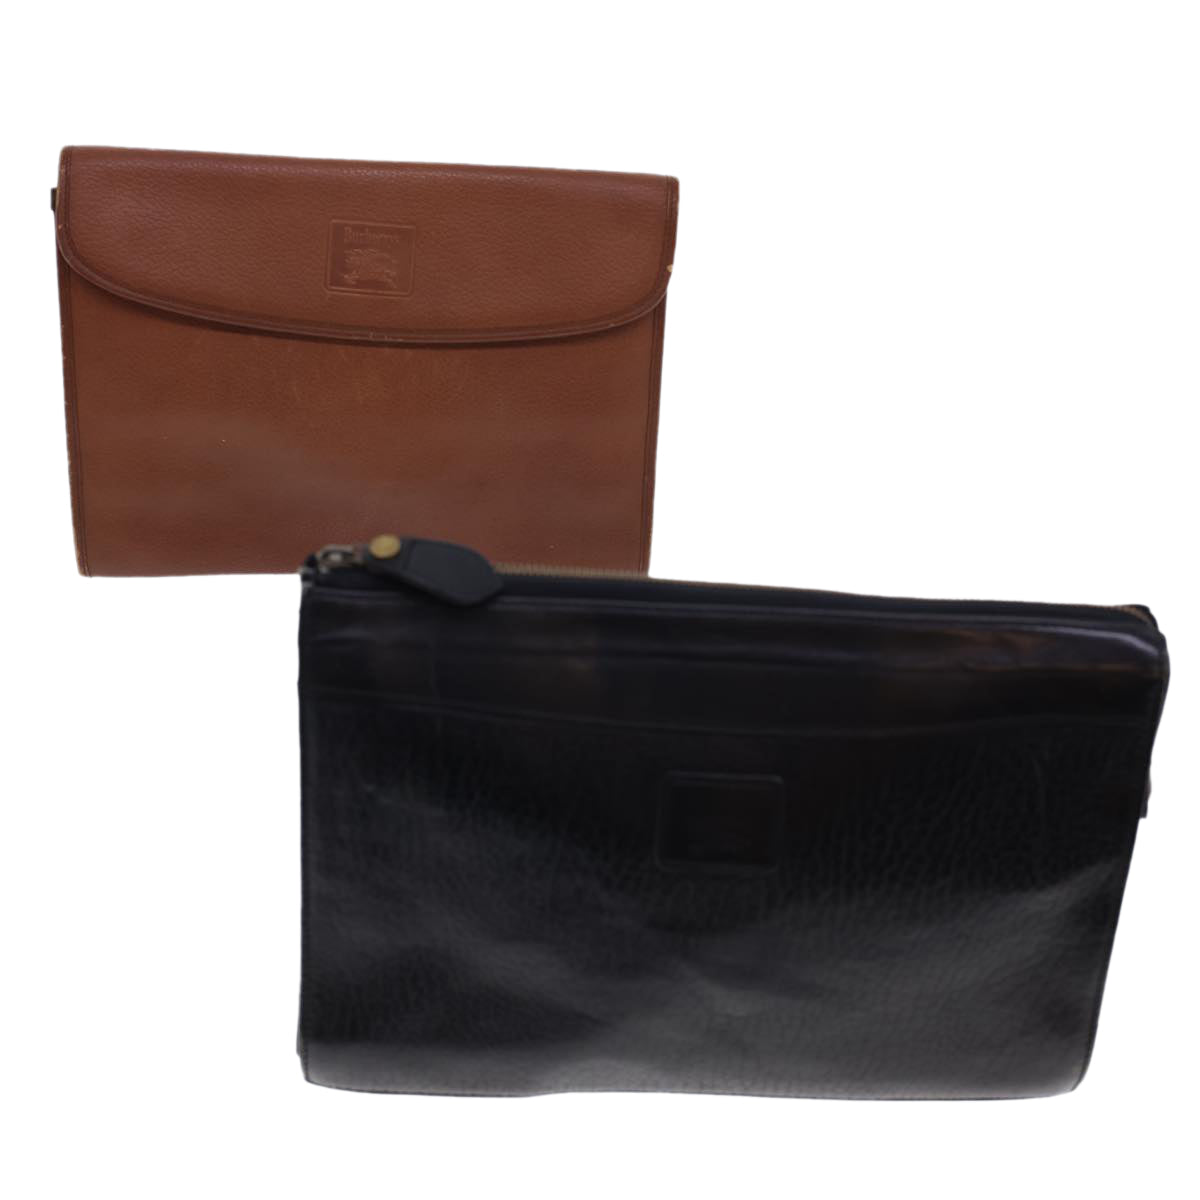 Burberrys Clutch Bag Leather 2Set Brown Black Auth bs4863